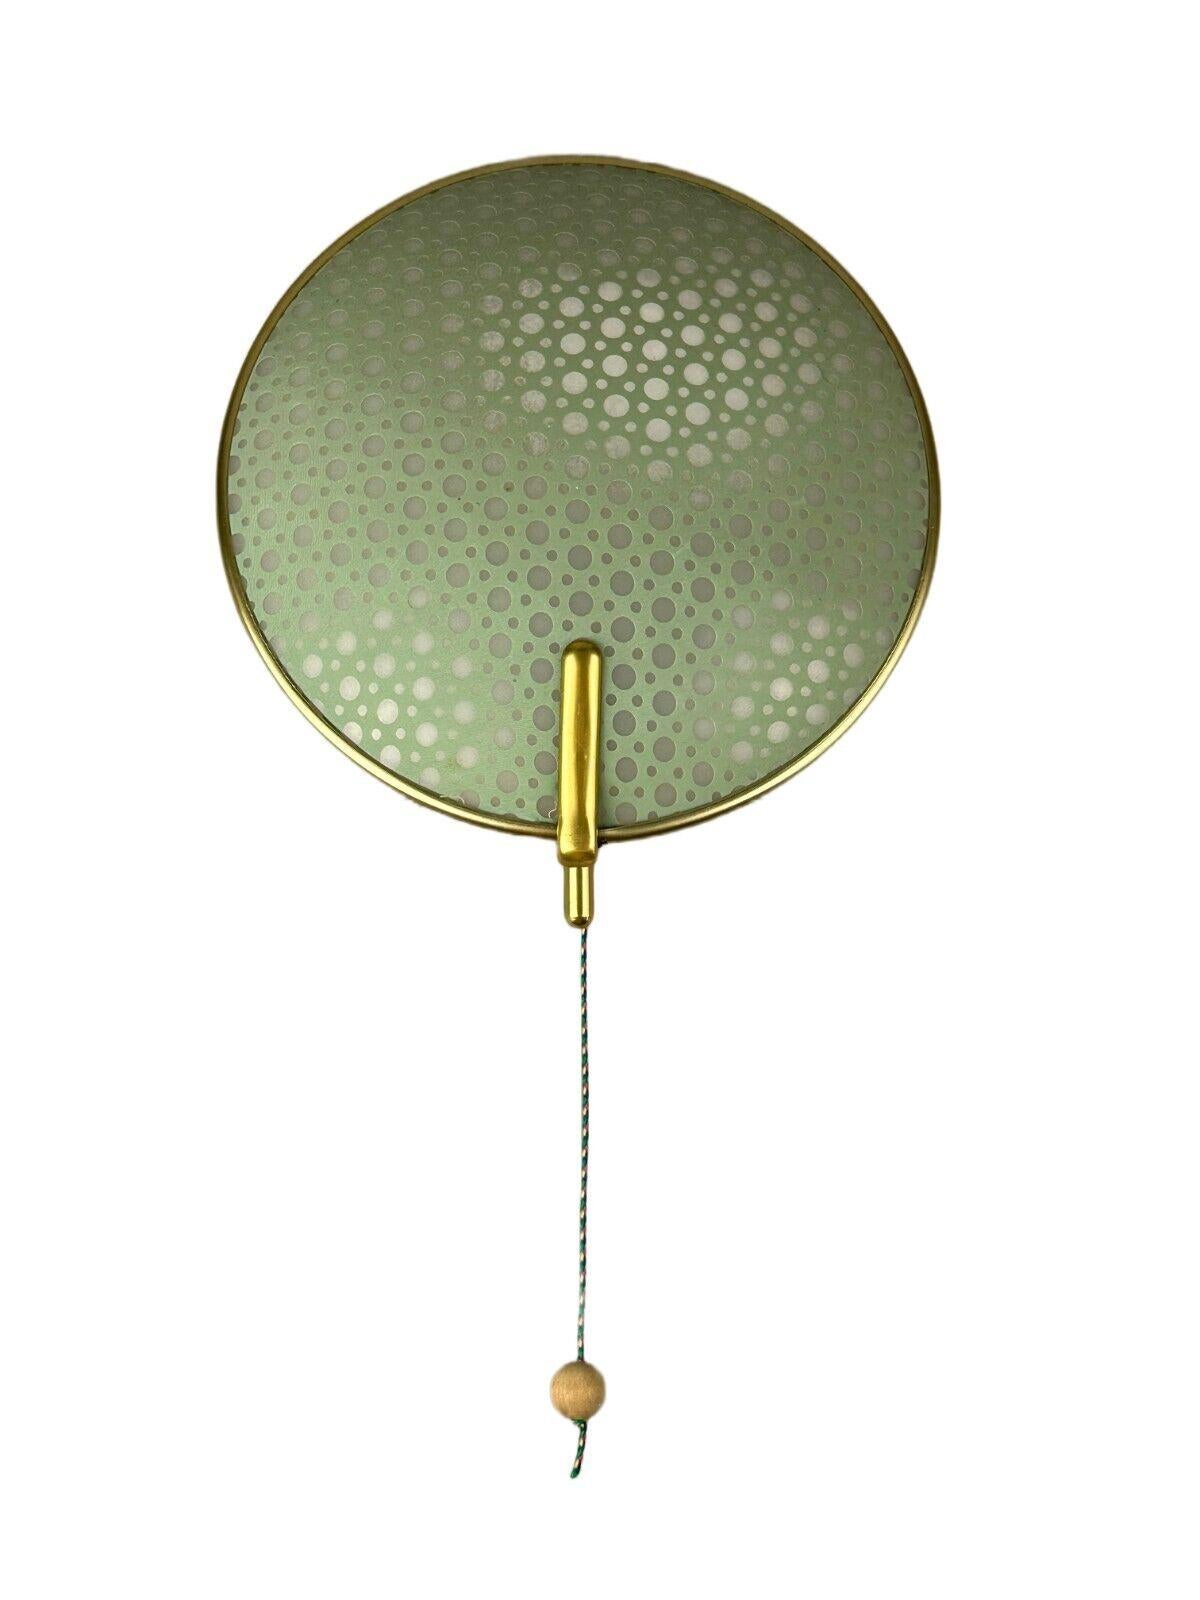 60s 70s wall lamp Erco Leuchten Germany Wall Sconce Space Age Design

Object: wall lamp

Manufacturer: Erco lights

Condition: good

Age: around 1960-1970

Dimensions:

Width = 19cm
Height = 21cm
Depth = 7cm

Material: plastic, metal, brass

Other